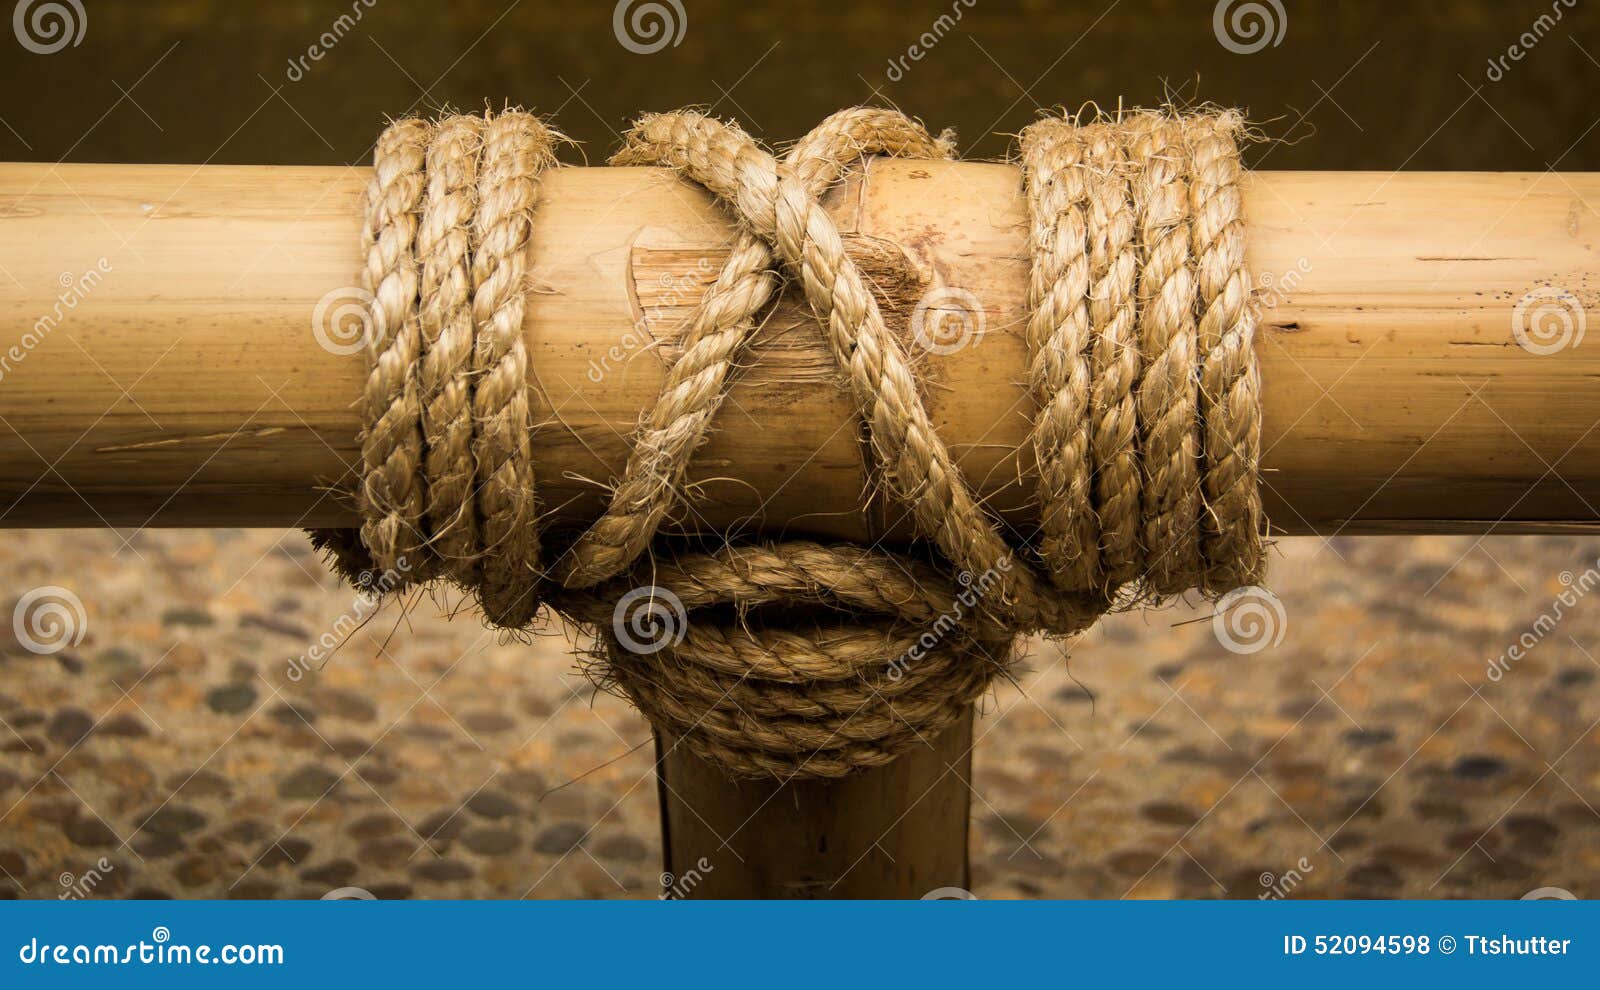 https://thumbs.dreamstime.com/z/rope-knot-bamboo-art-fence-52094598.jpg